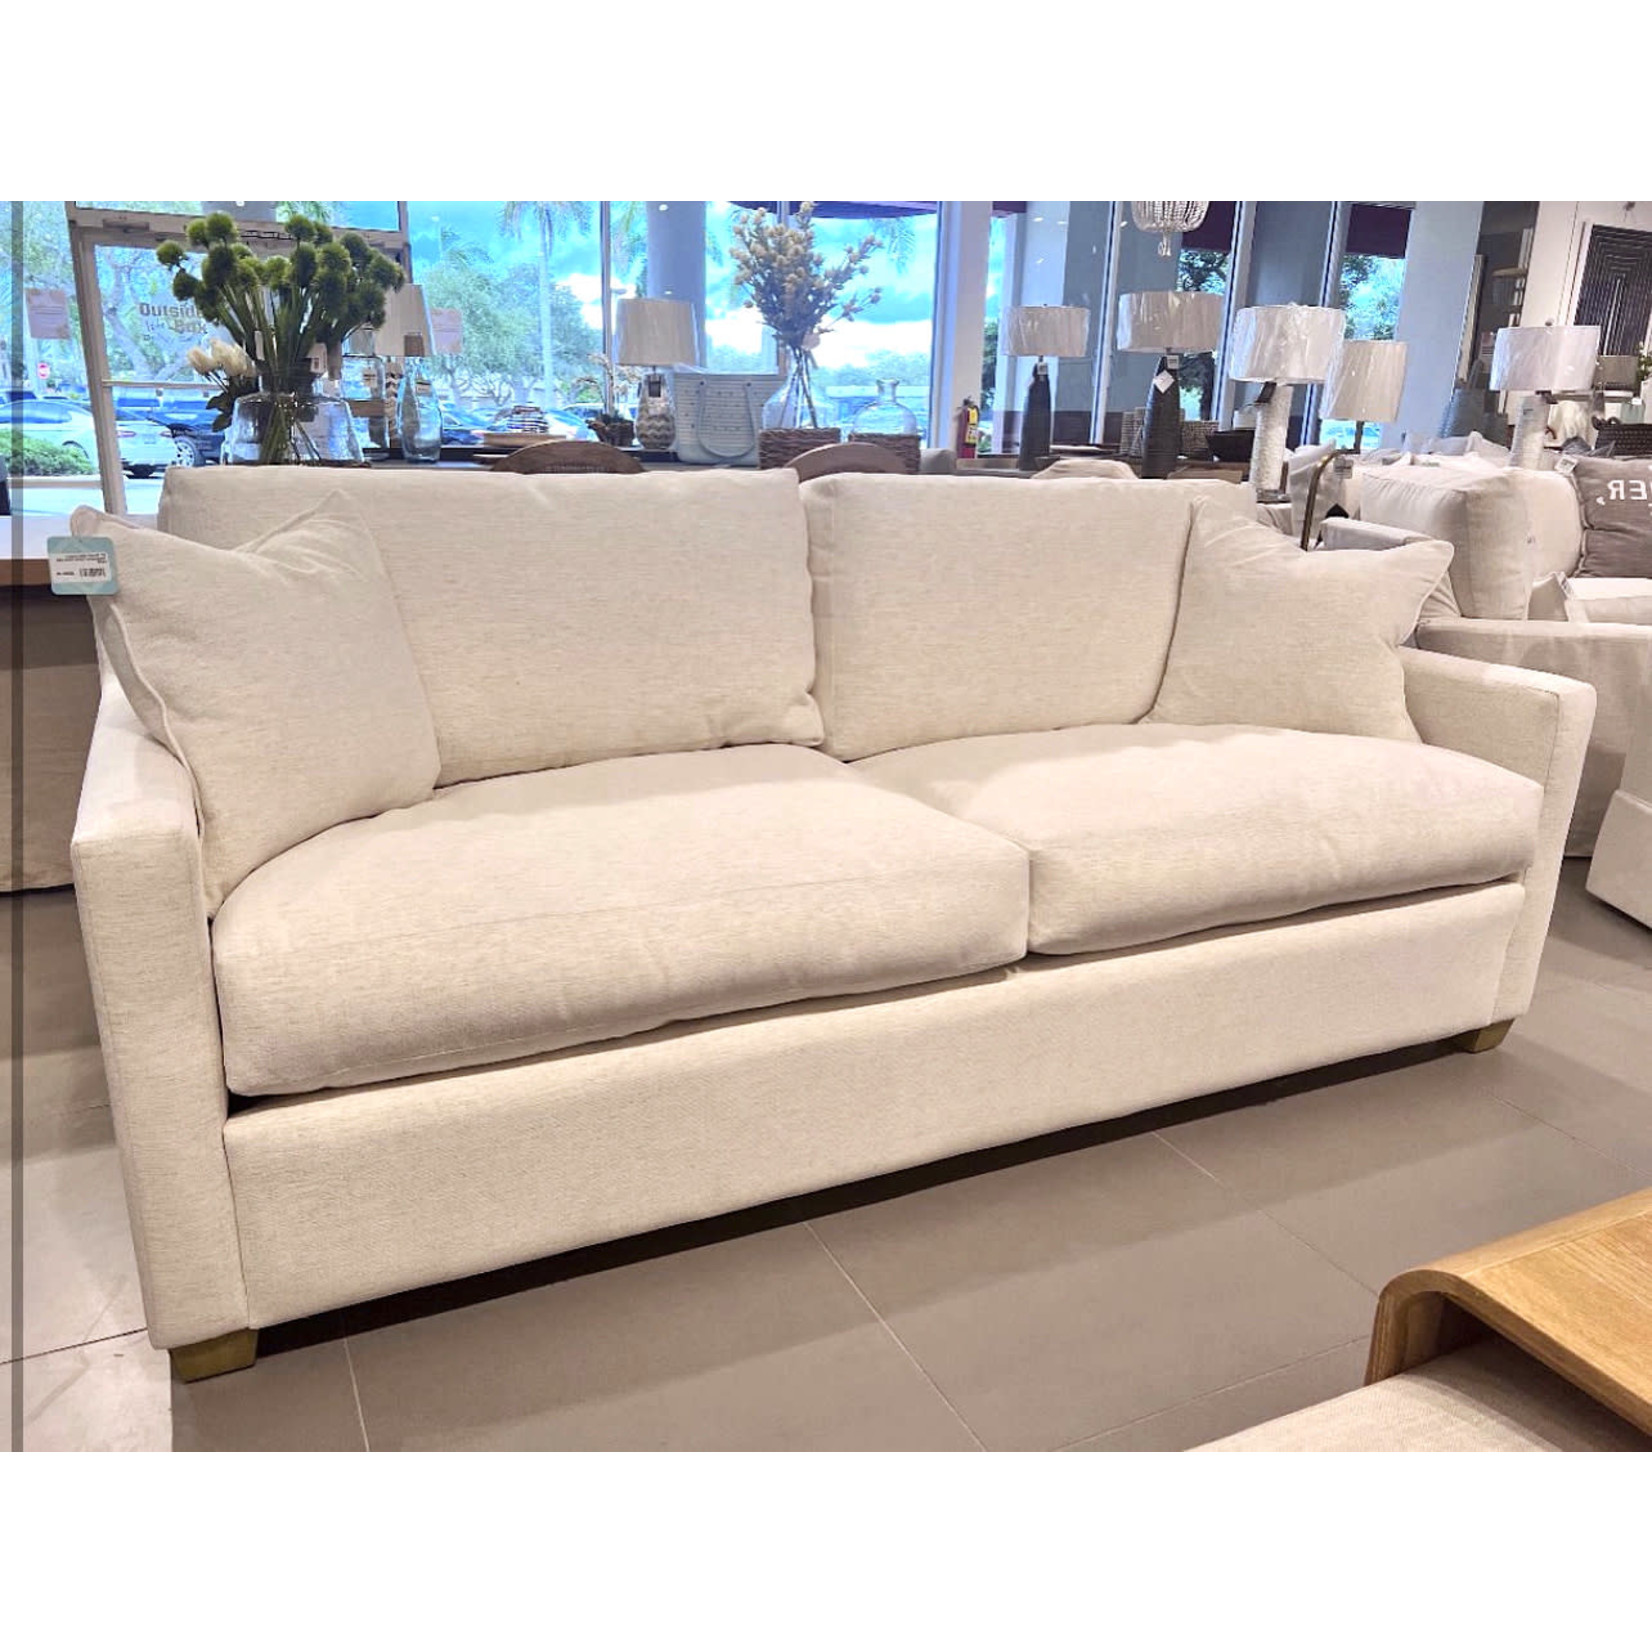 Outside The Box 77" Nomad Snow Crypton Performance Upholstered Trillium Down Sofa Sleeper Q5422